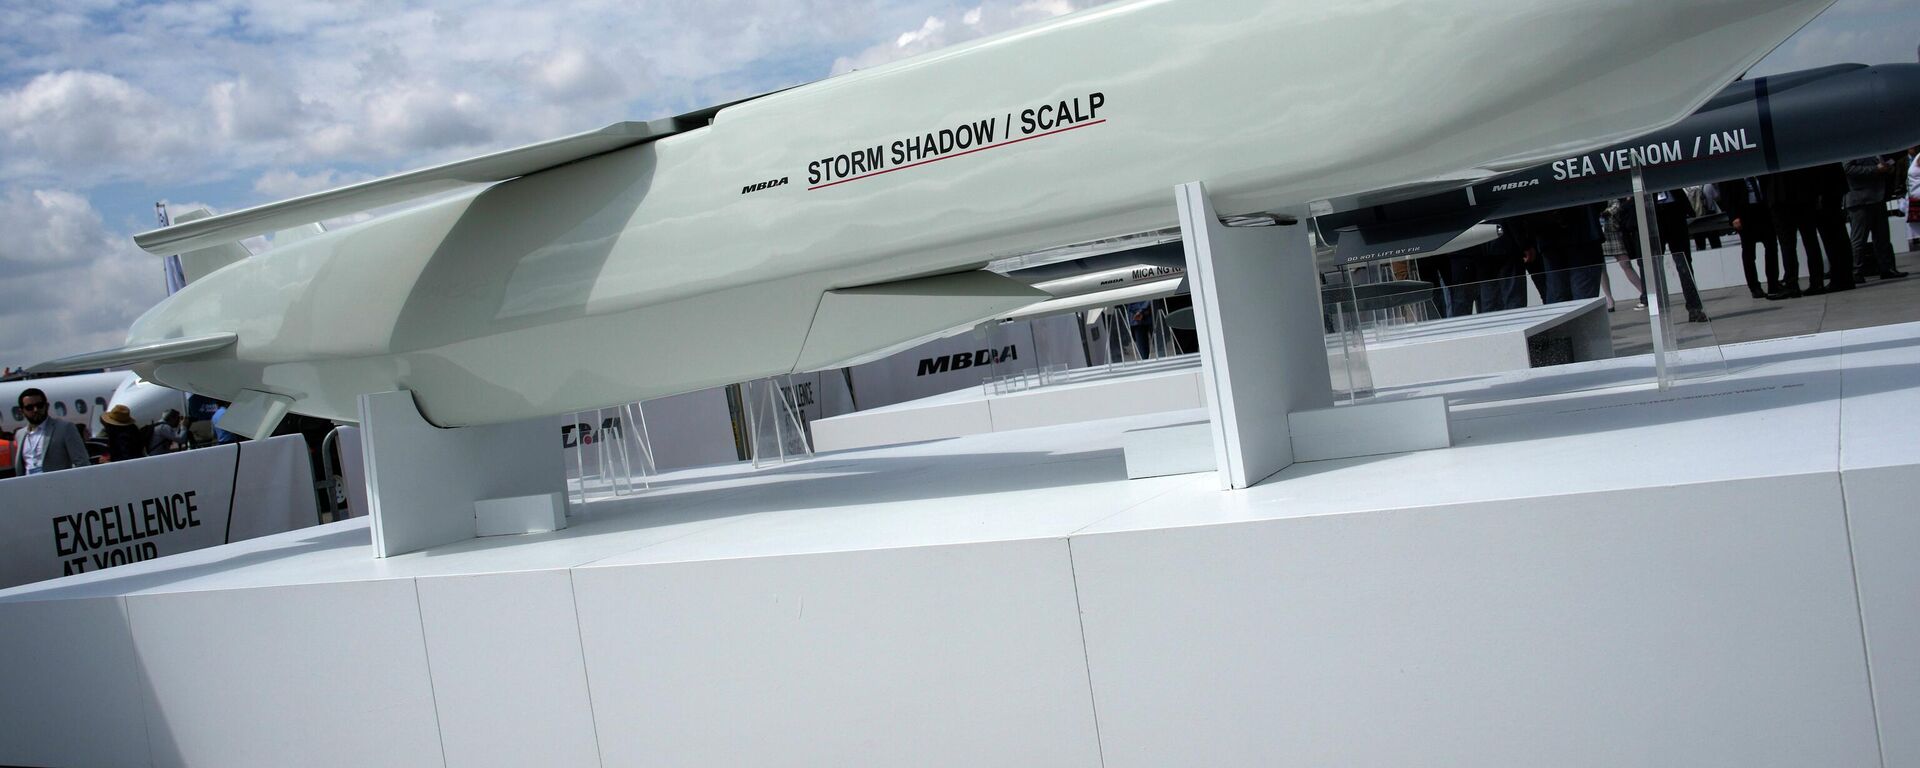 The Storm Shadow cruise missile is on display during the Paris Air Show in Le Bourget, north of Paris, France, Monday, June 19, 2023. France will deliver deep-strike missiles to Ukraine as part of increased efforts to help with the Ukrainian counteroffensive against Russian forces, President Emmanuel Macron said Tuesday July 11, 2023 at the NATO summit in Vilnius. France has been weighing whether to send Scalp missiles, the equivalent of the British Storm Shadow missiles, to Ukraine.  - Sputnik International, 1920, 21.09.2023